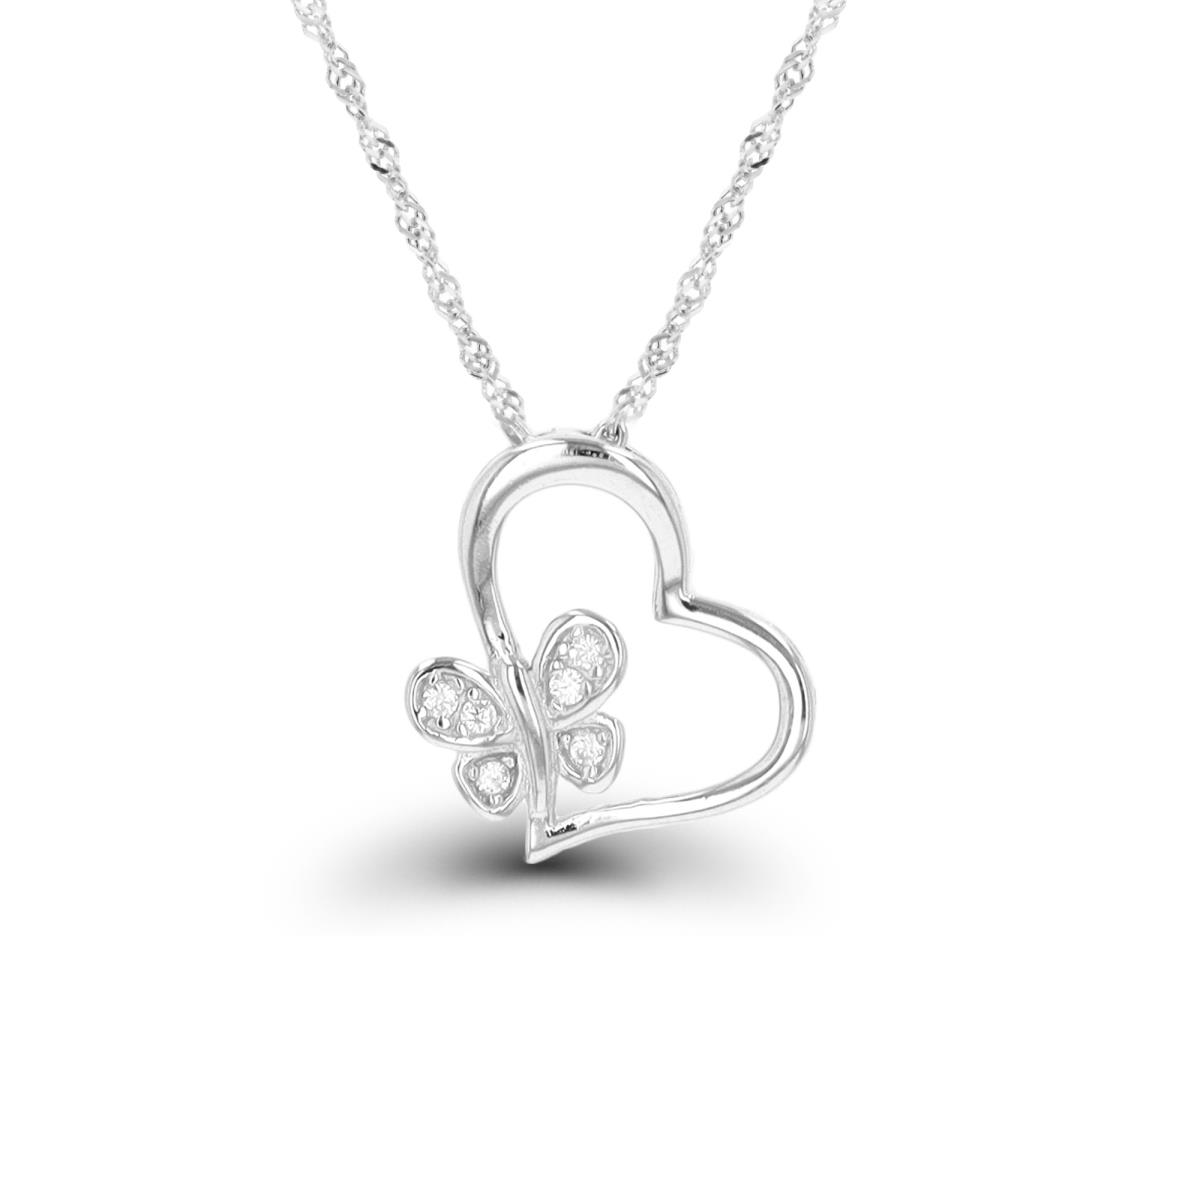 Sterling Silver Rhodium Butterfly & Heart Necklace 10"+2" Singapore Necklace